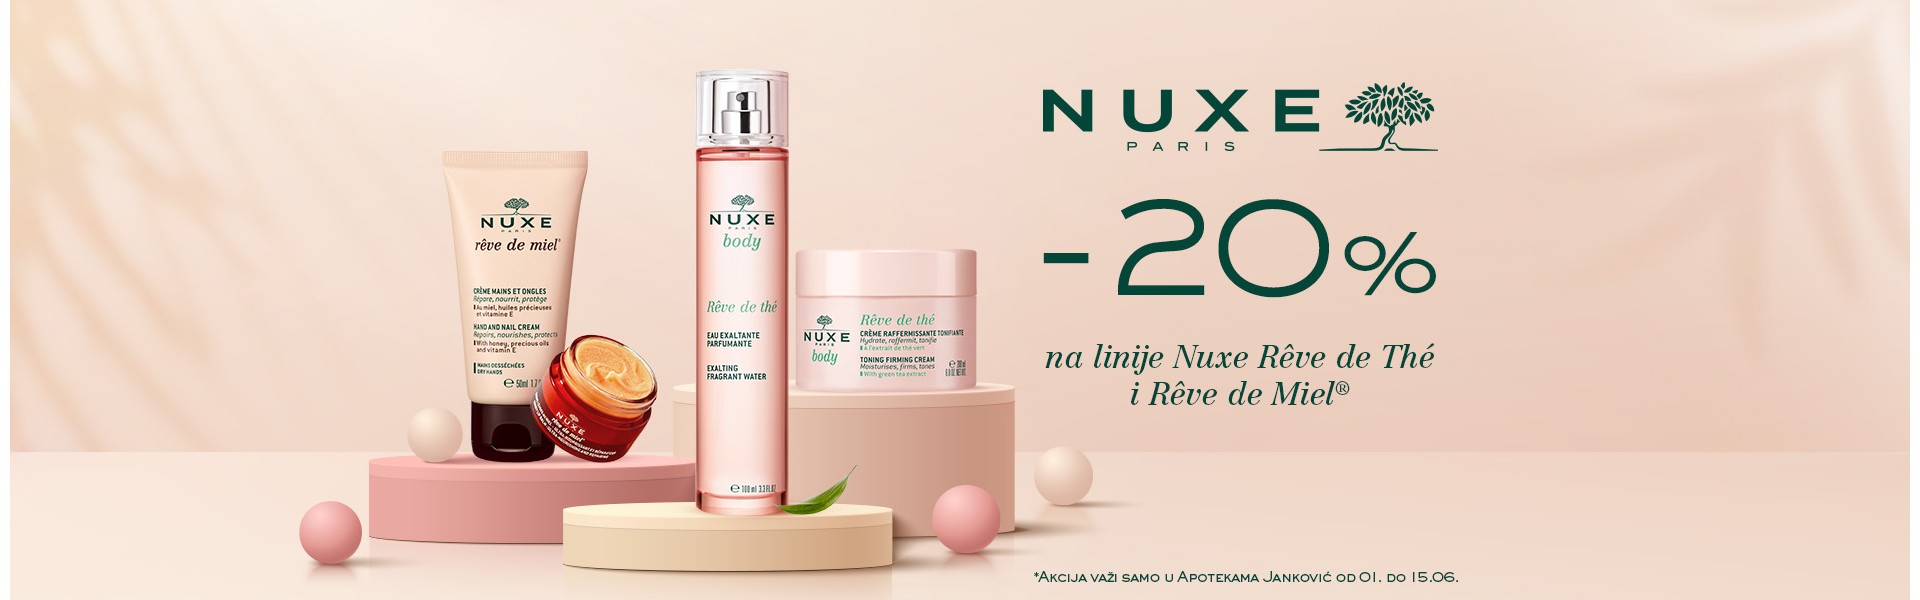 NUxe